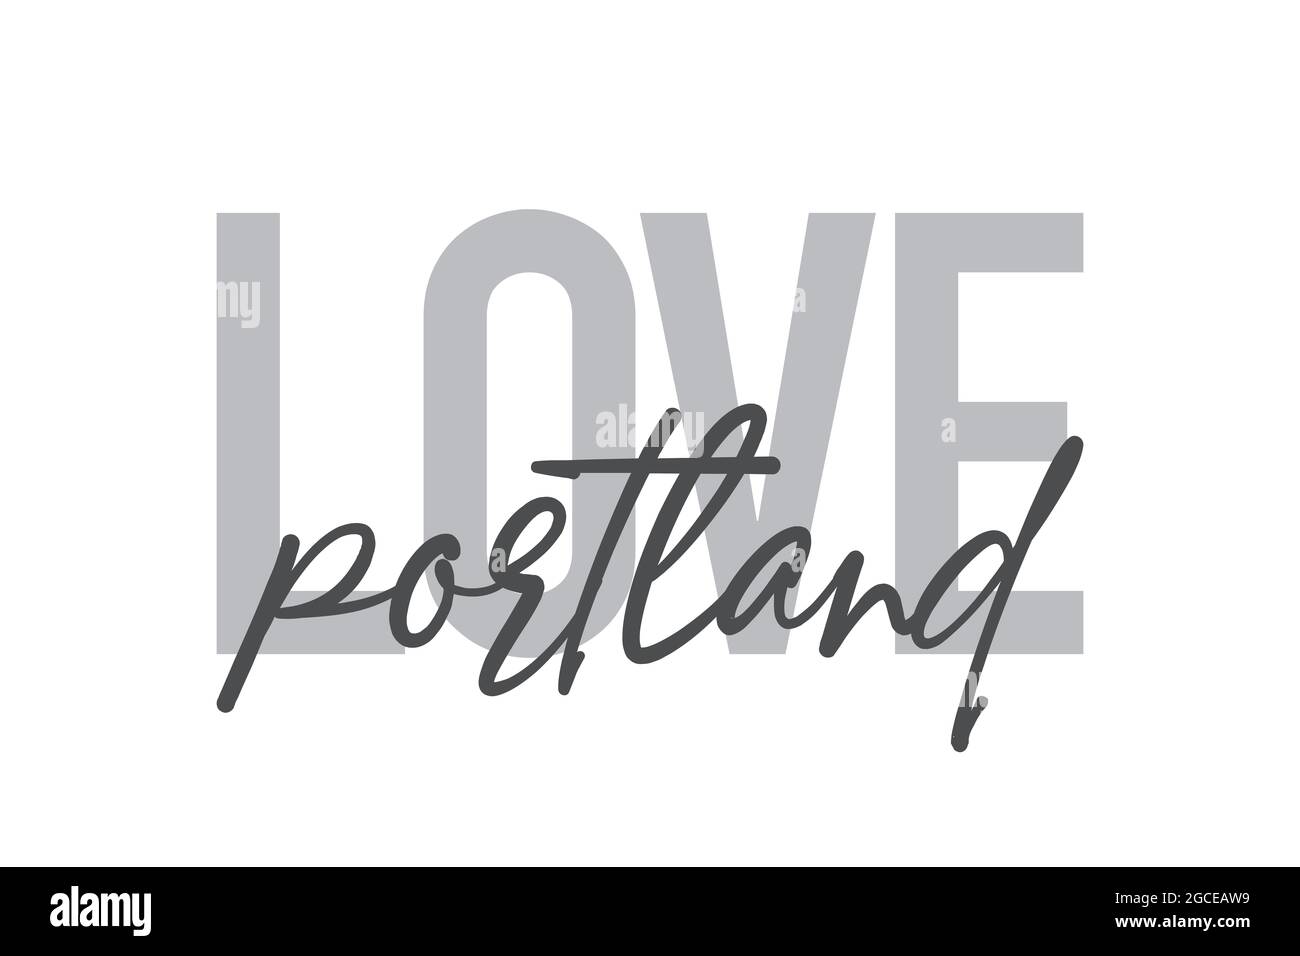 Modern, simple, minimal typographic design of a saying 'Love Portland' in tones of grey color. Cool, urban, trendy and playful graphic vector art with Stock Photo